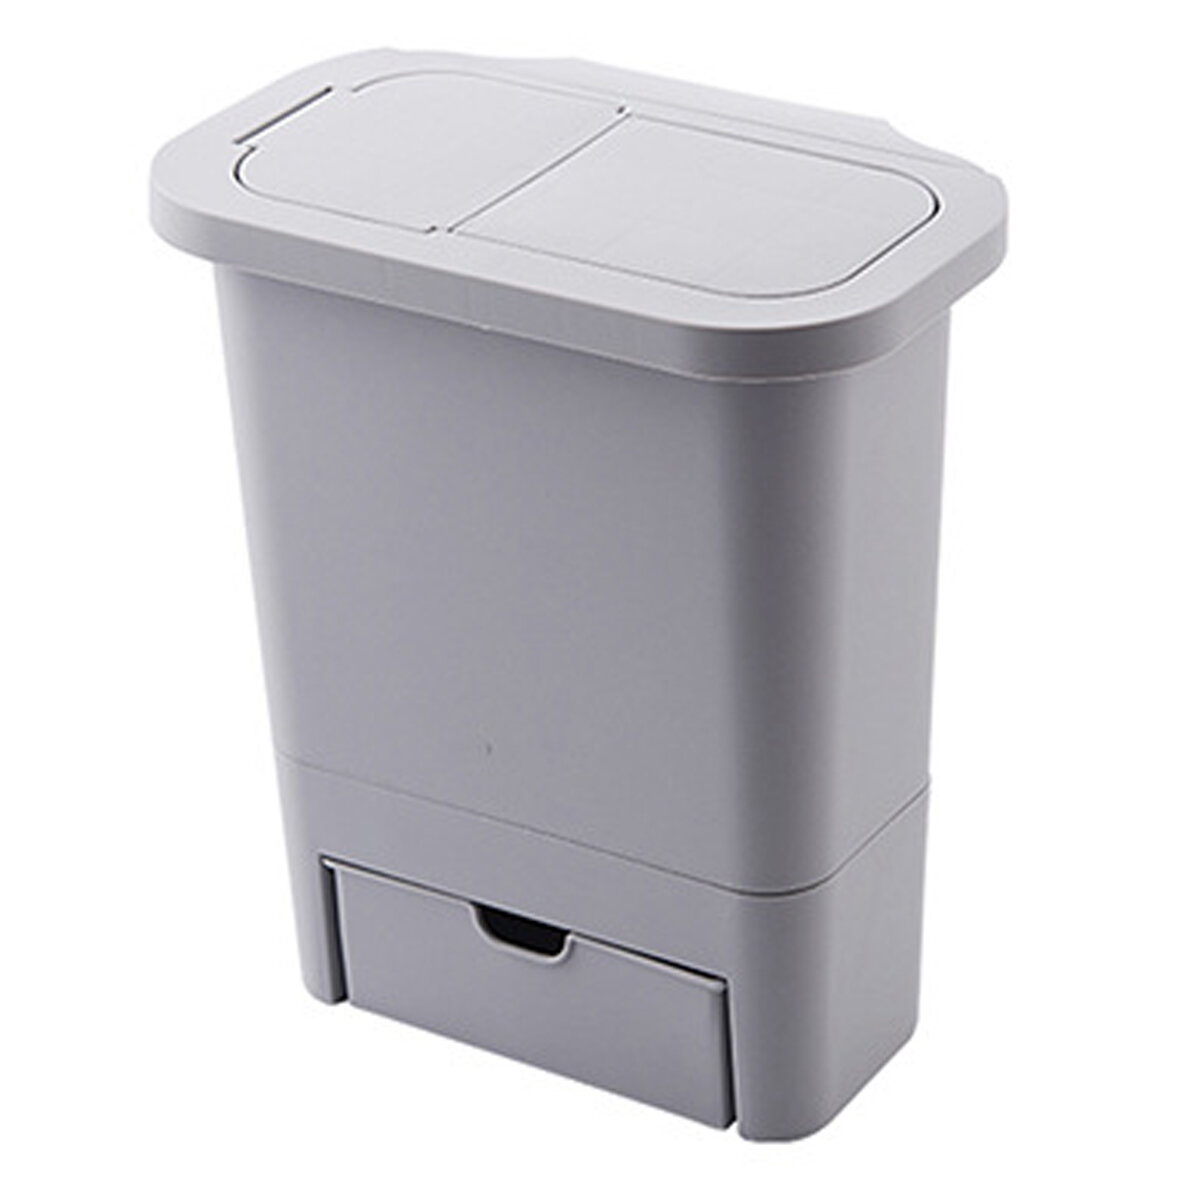 

Wall-mounted Sliding Lid Trash Can Kitchen Door Hanging Garbage Storage Bucket Stovetop Waste Bin for Office Home Bathro